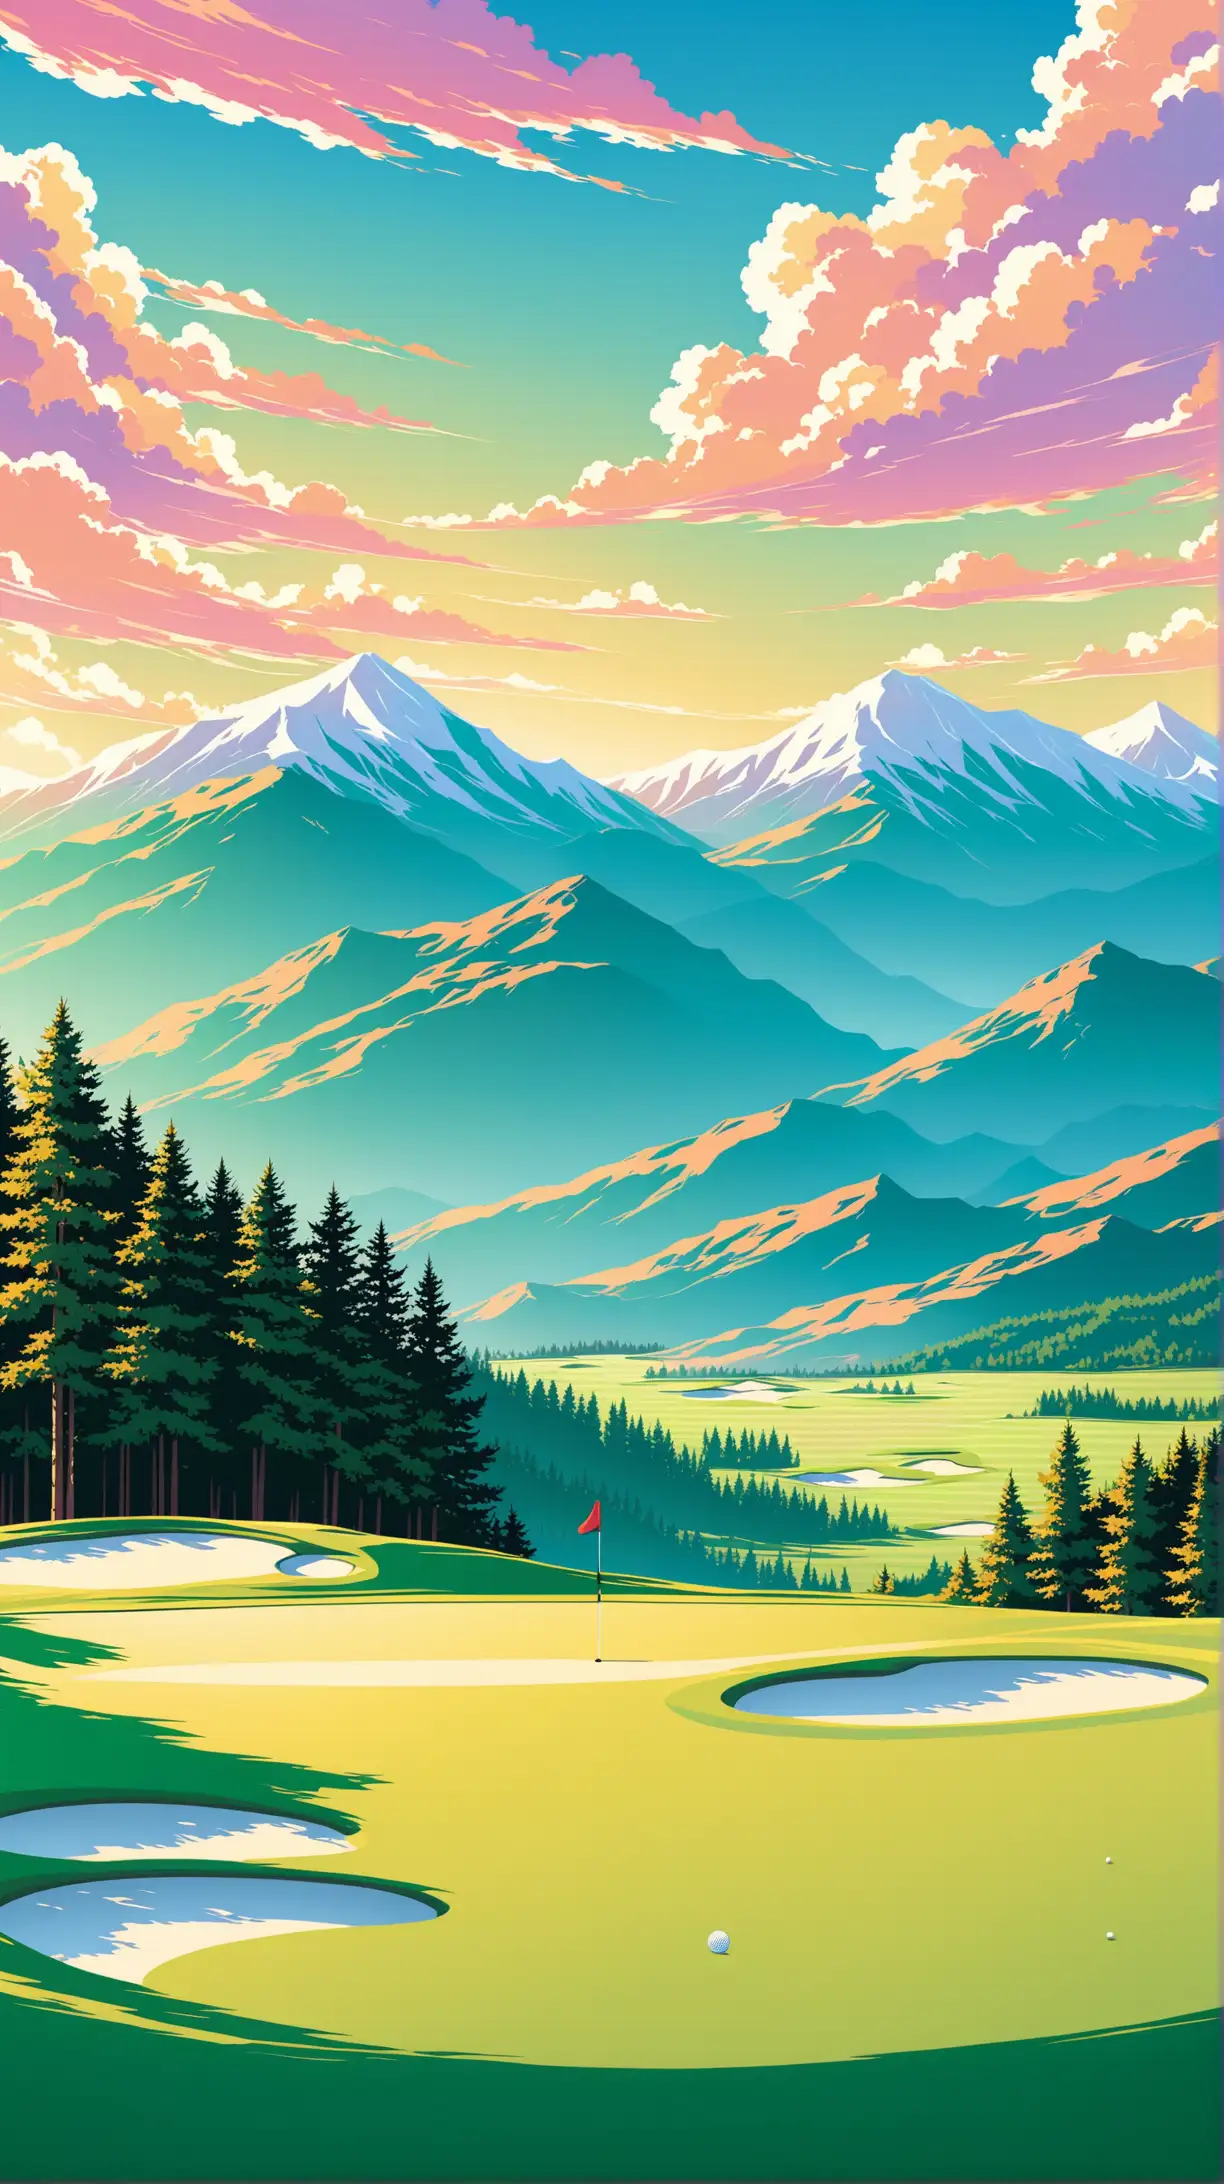 Scenic Golf Course with Mountainous Backdrop Tranquil Landscape Vector Illustration